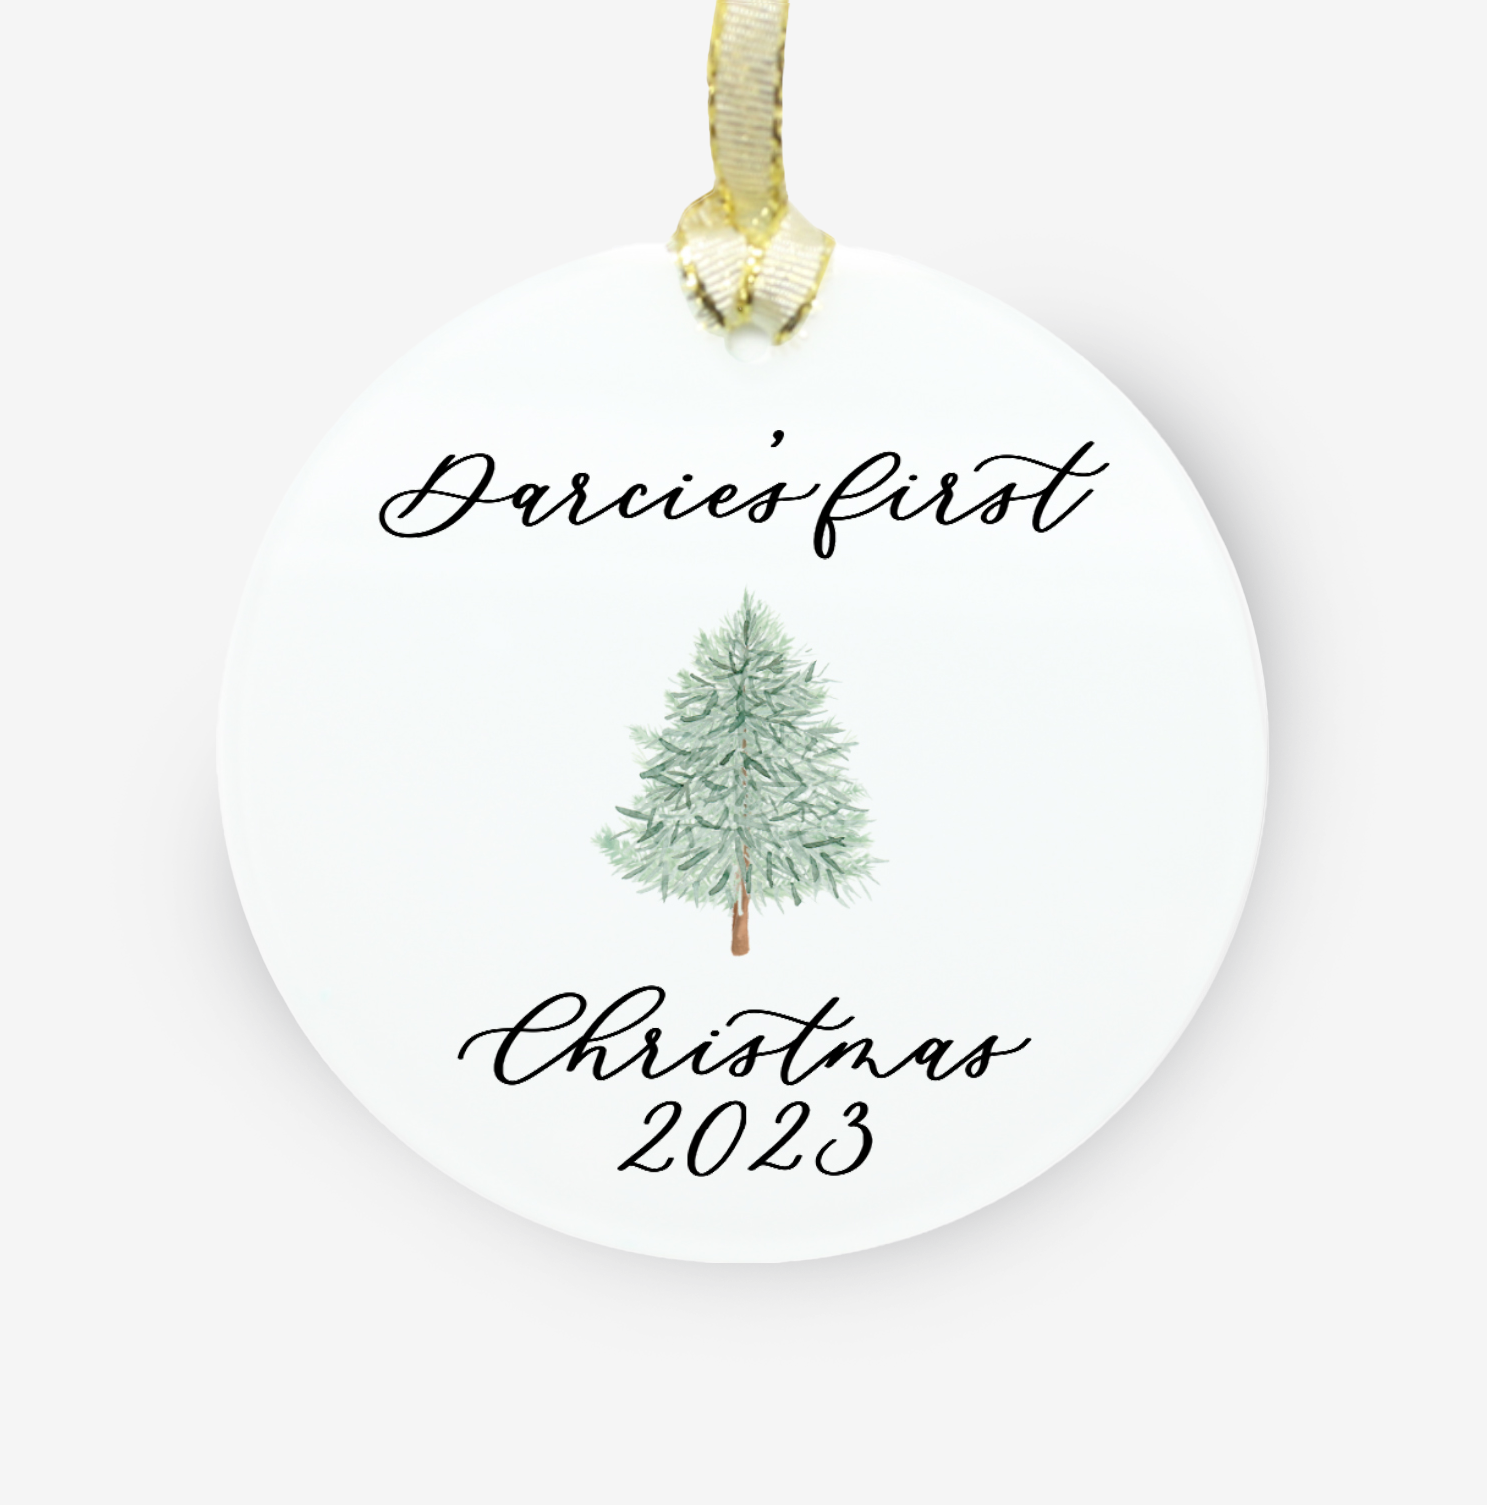 Personalized First Christmas Ornament 2023 Baby's First Christmas